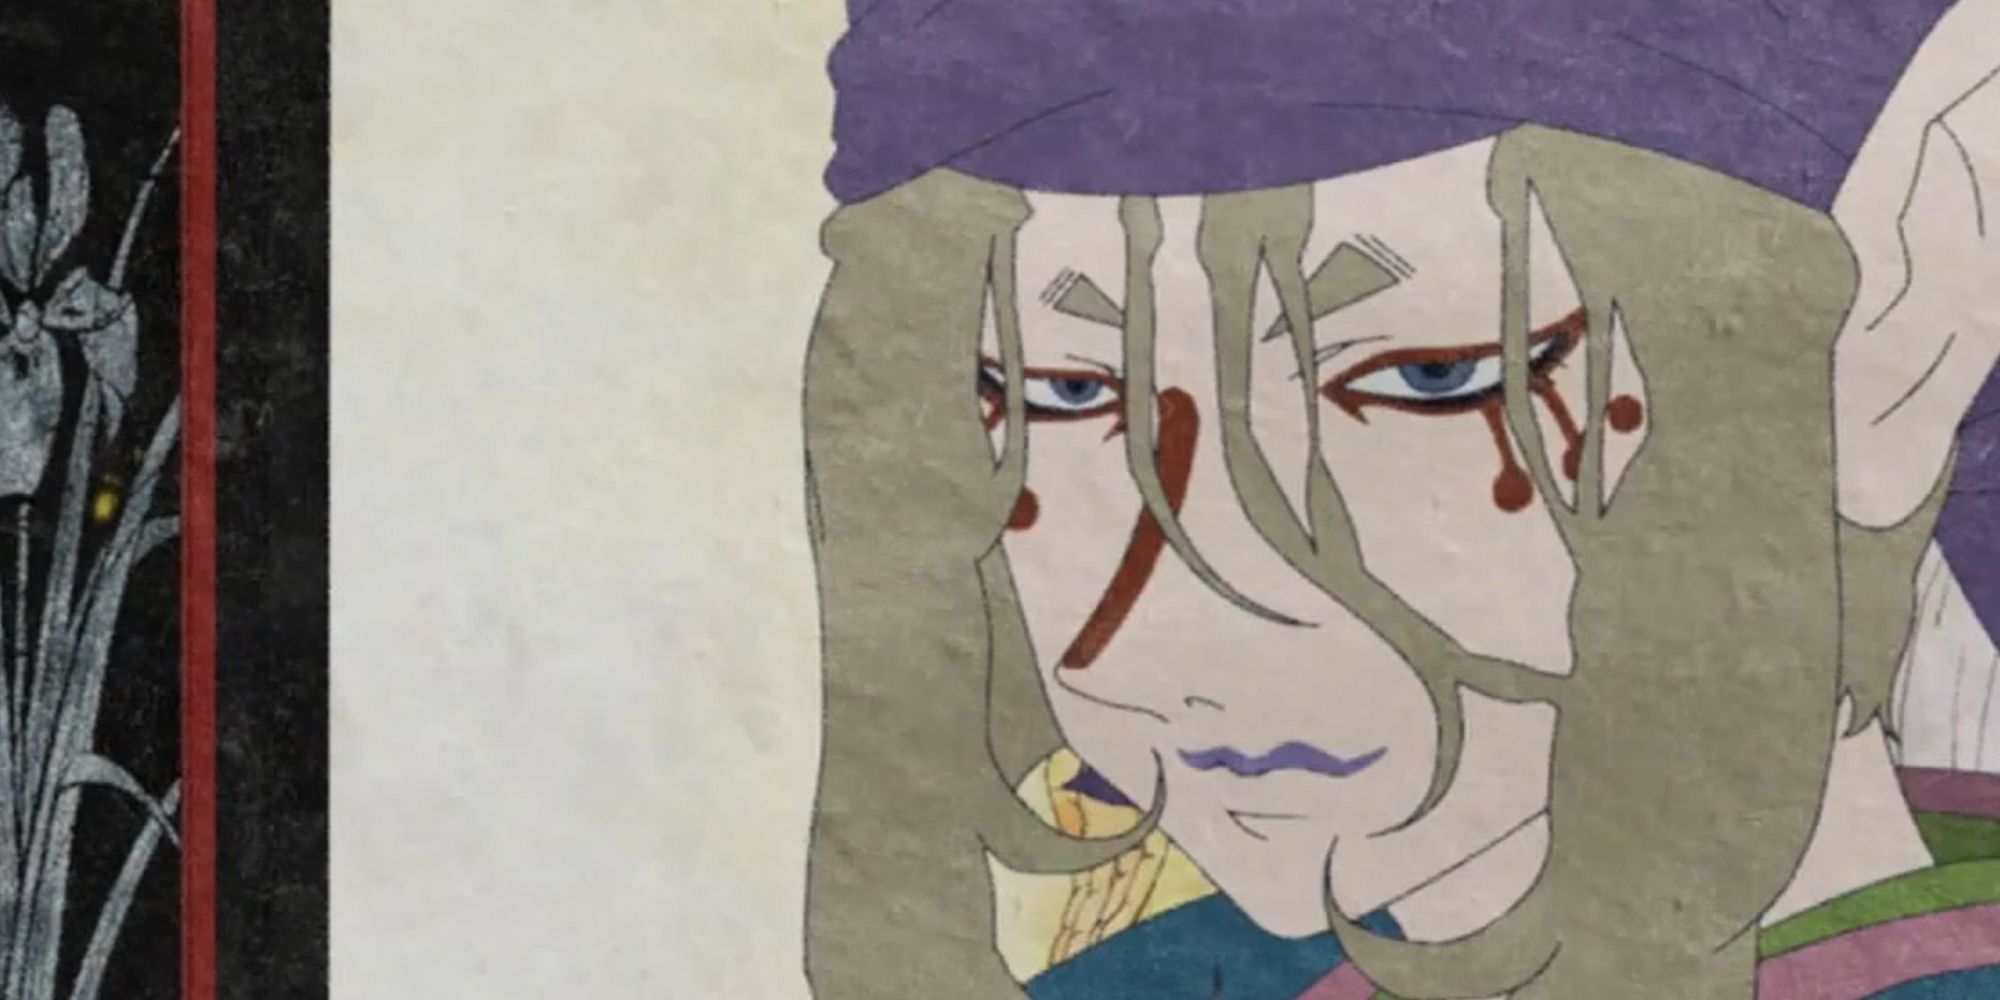 The Medicine Seller from Mononoke, adorned with his purple hair piece and makeup